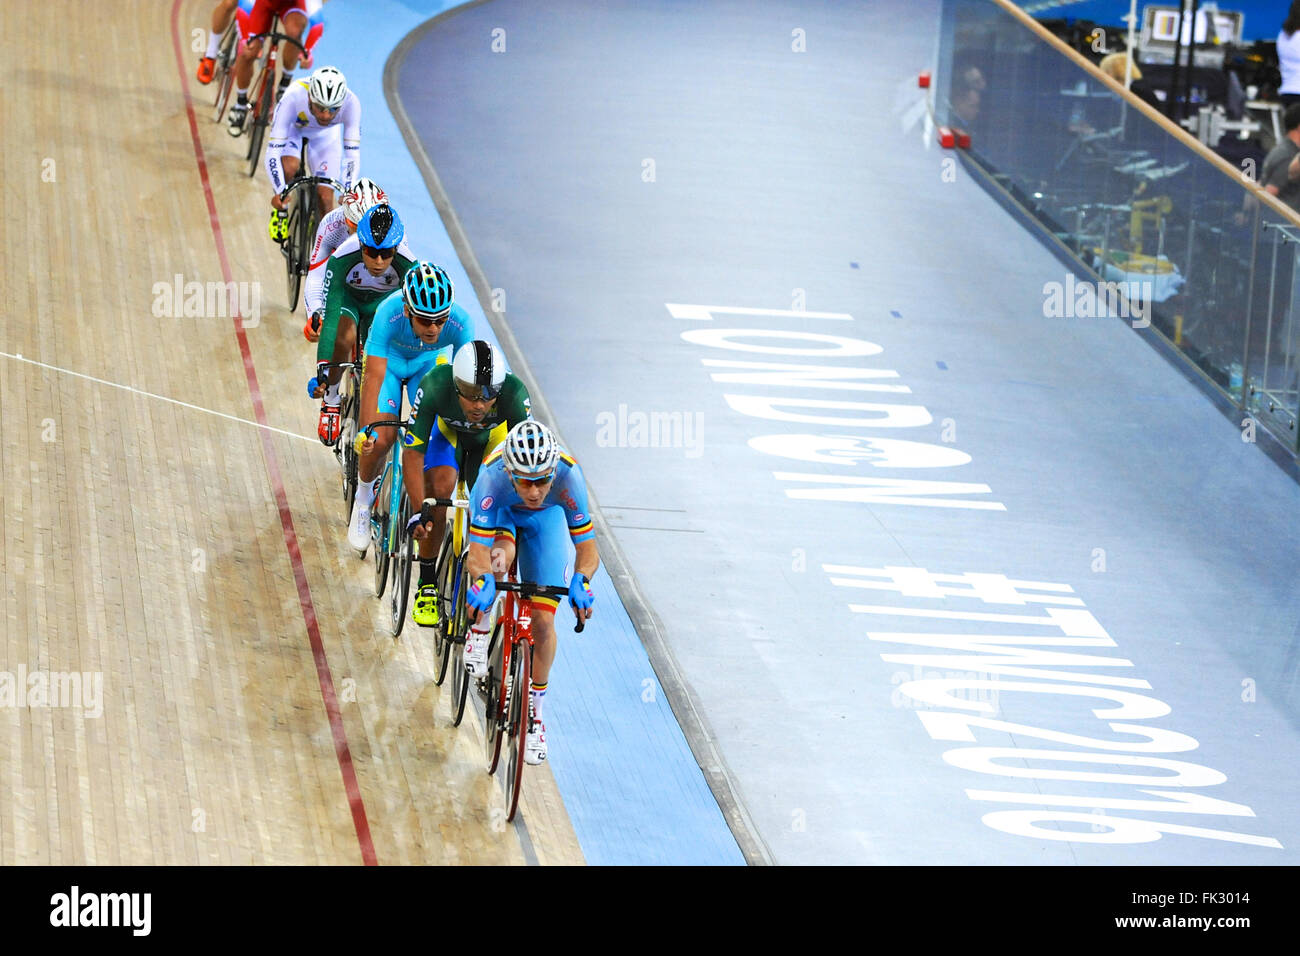 London, UK. 05th Mar, 2016. A stretched out peleton, being led by Jasper De Buyst (BEL) during the Men's Omnium Final at the UCI 2016 Track Cycling World Championships, Lee Valley Velo Park. Riders behind the leader are: Gideoni Monteiro (BRA), Artyom Zakharov (KAZ), Ignacio Prado (MEX), Sang-Hoon Park (KOR) and Fernando Gaviria Rendon (COL). Credit:  Michael Preston/Alamy Live News Stock Photo